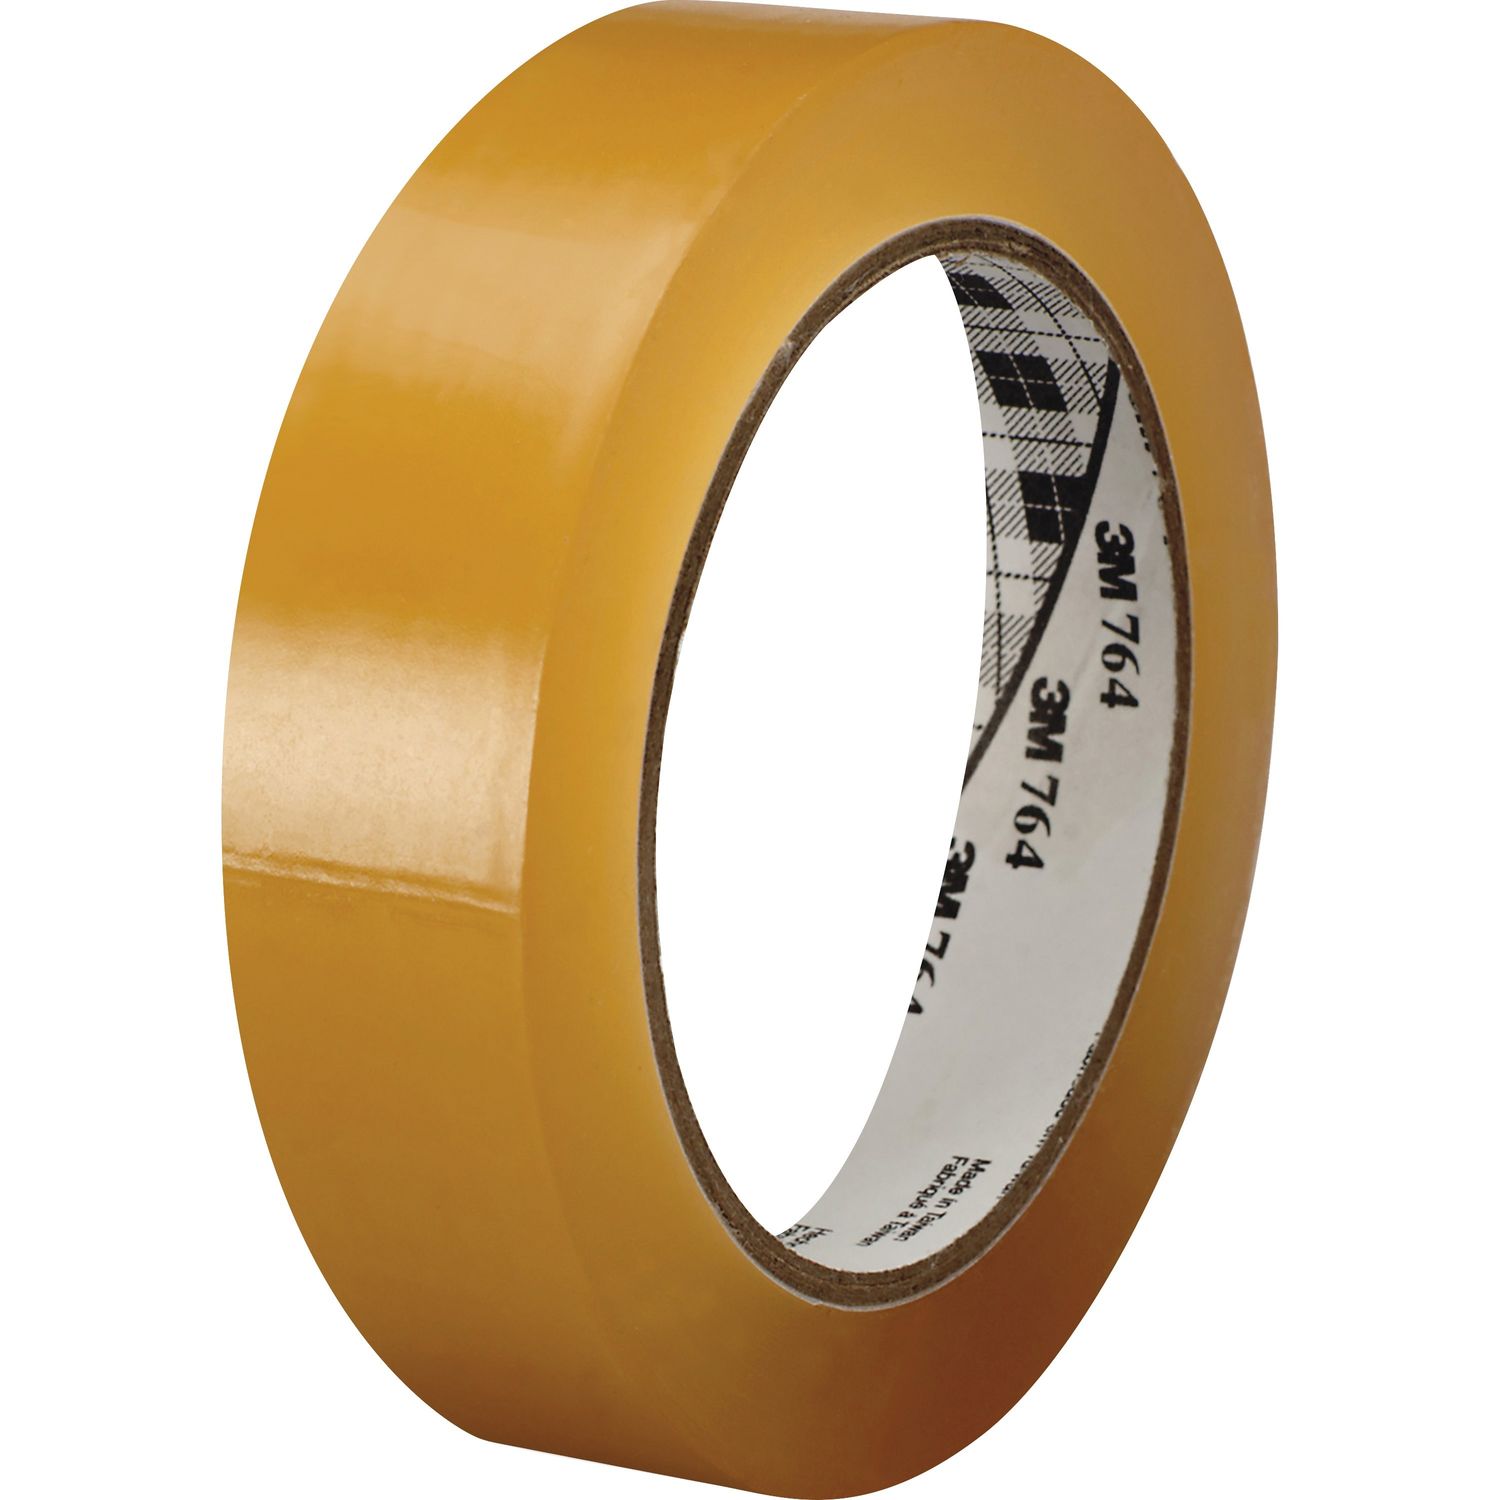 General-Purpose Vinyl Tape 764 36 yd Length x 1" Width, 5 mil Thickness, Rubber, 4 mil, Polyvinyl Chloride (PVC) Backing, 1 / Roll, Tan Tint